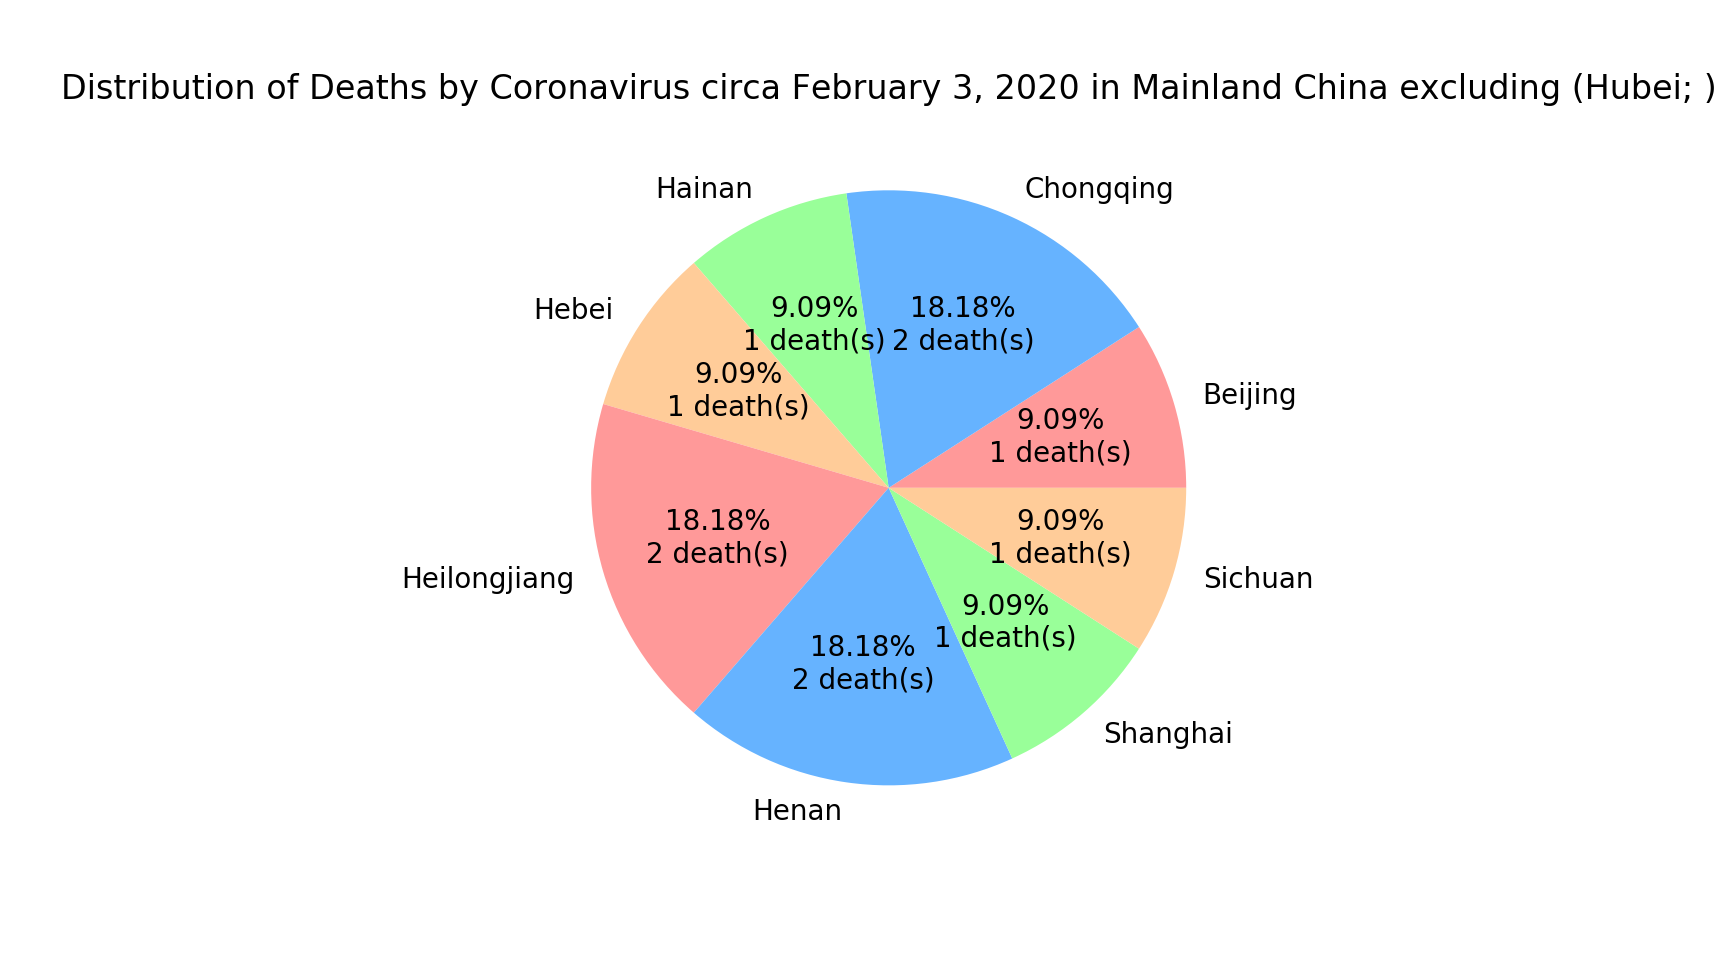 Distribution of Deaths in Mainland China excluding Hubei